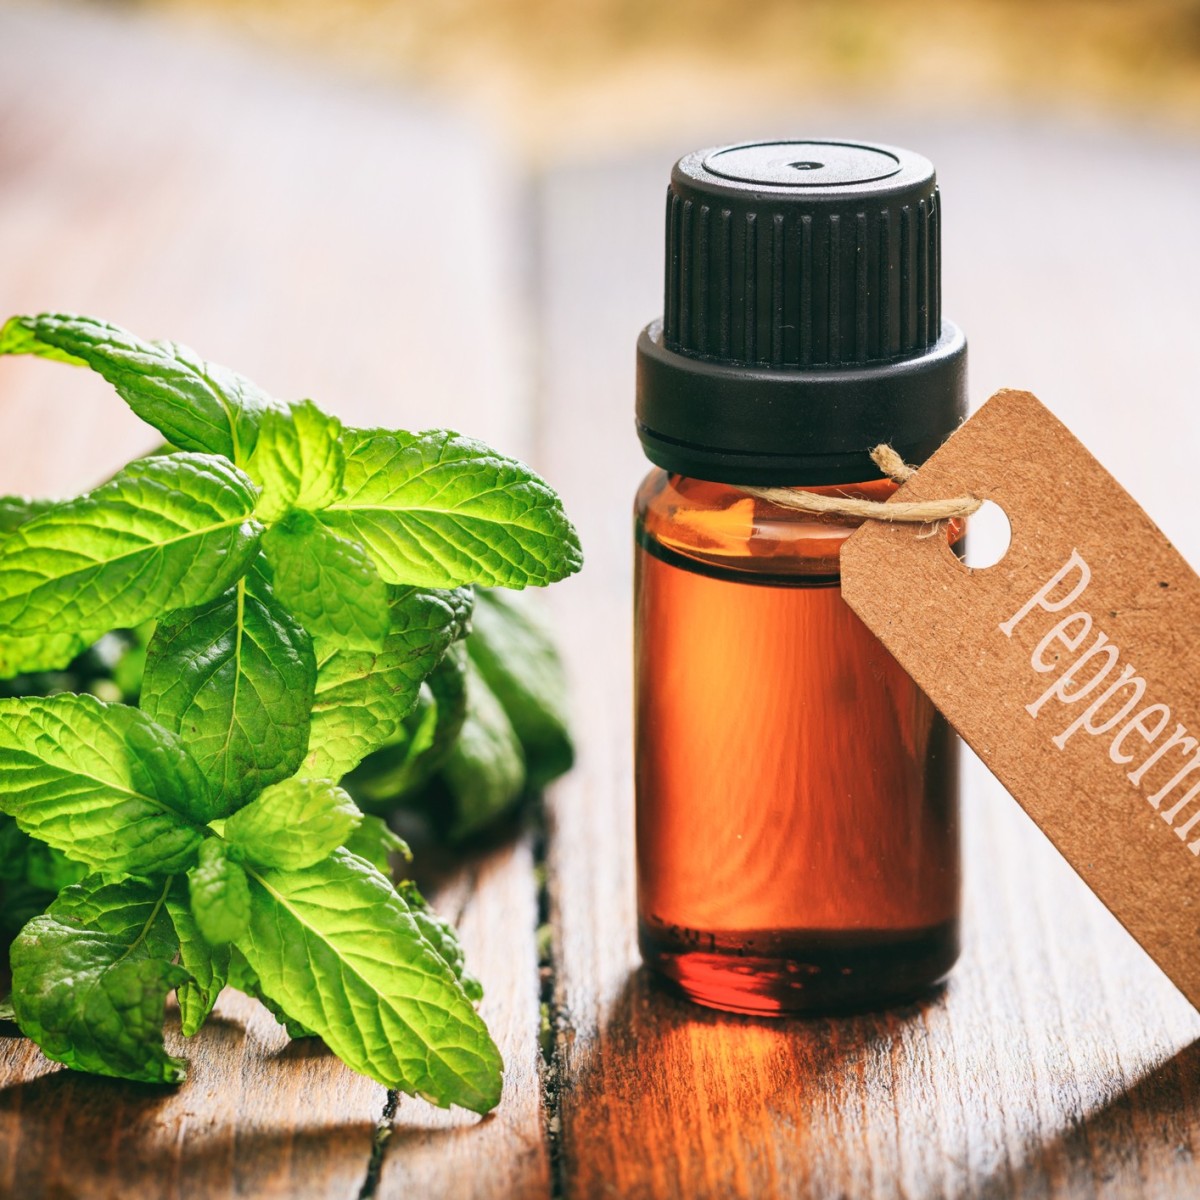 peppermint oil for rats in cars